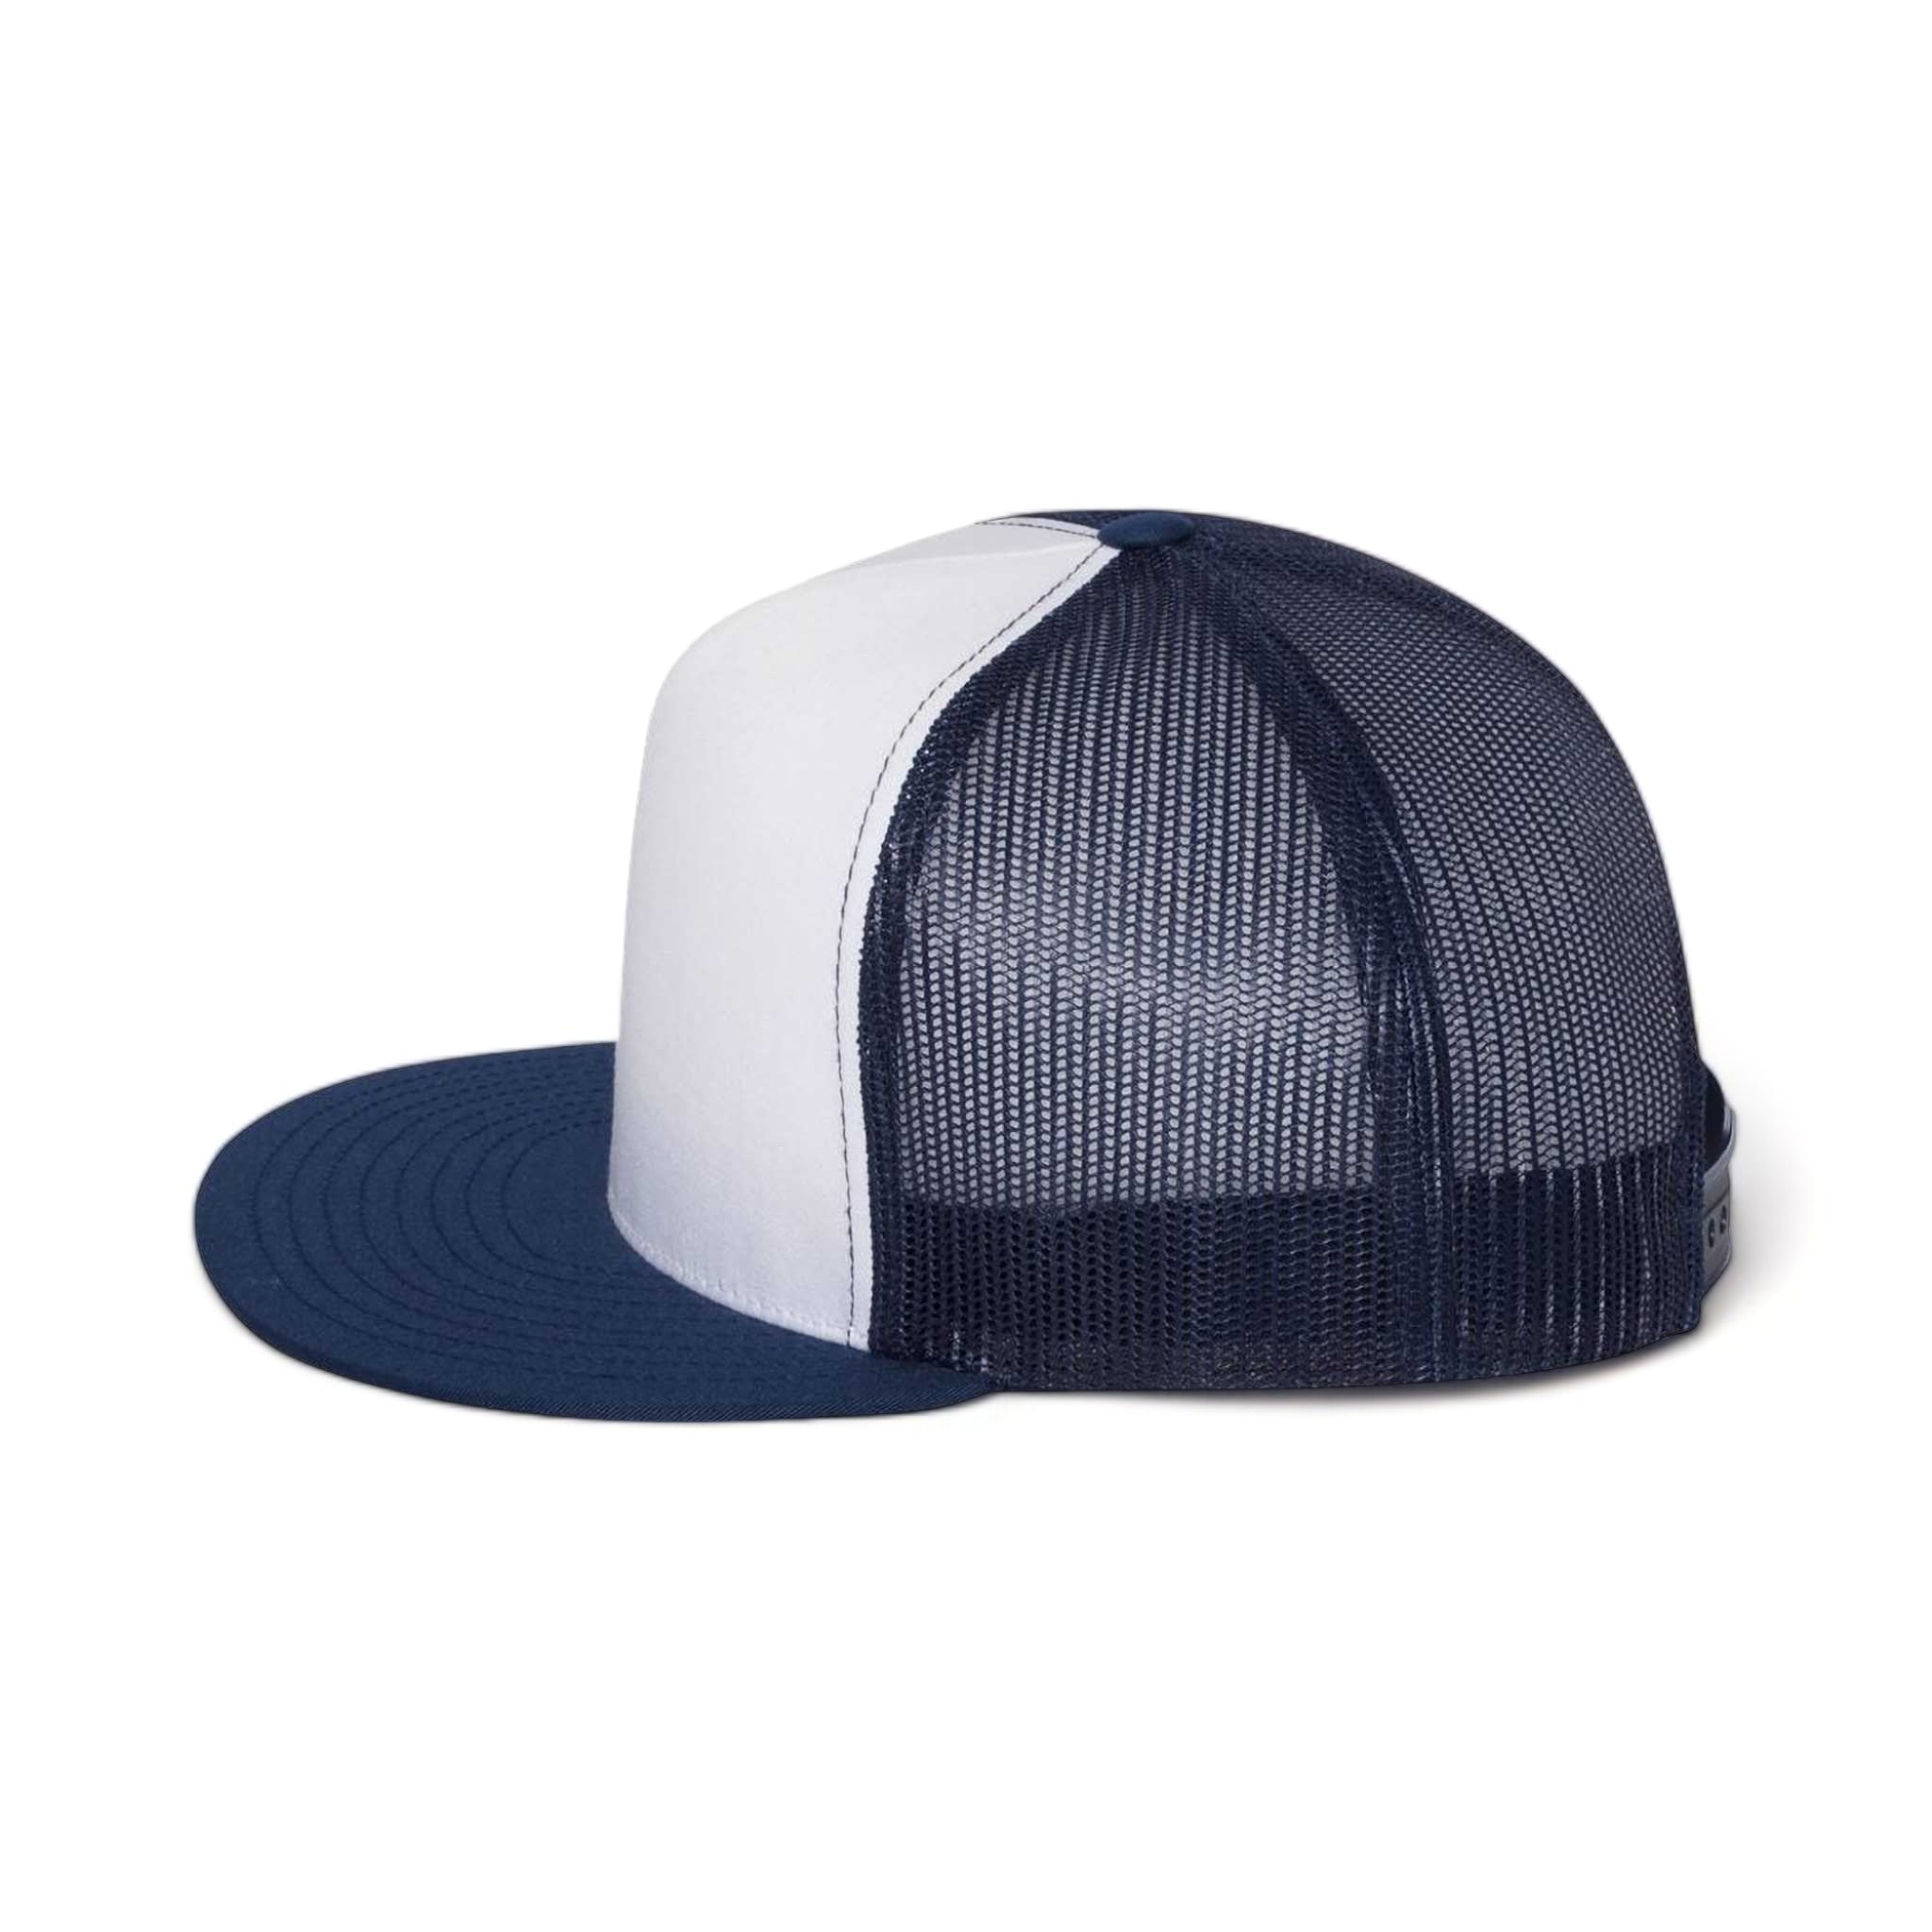 Side view of YP Classics 6006 custom hat in navy, white and navy